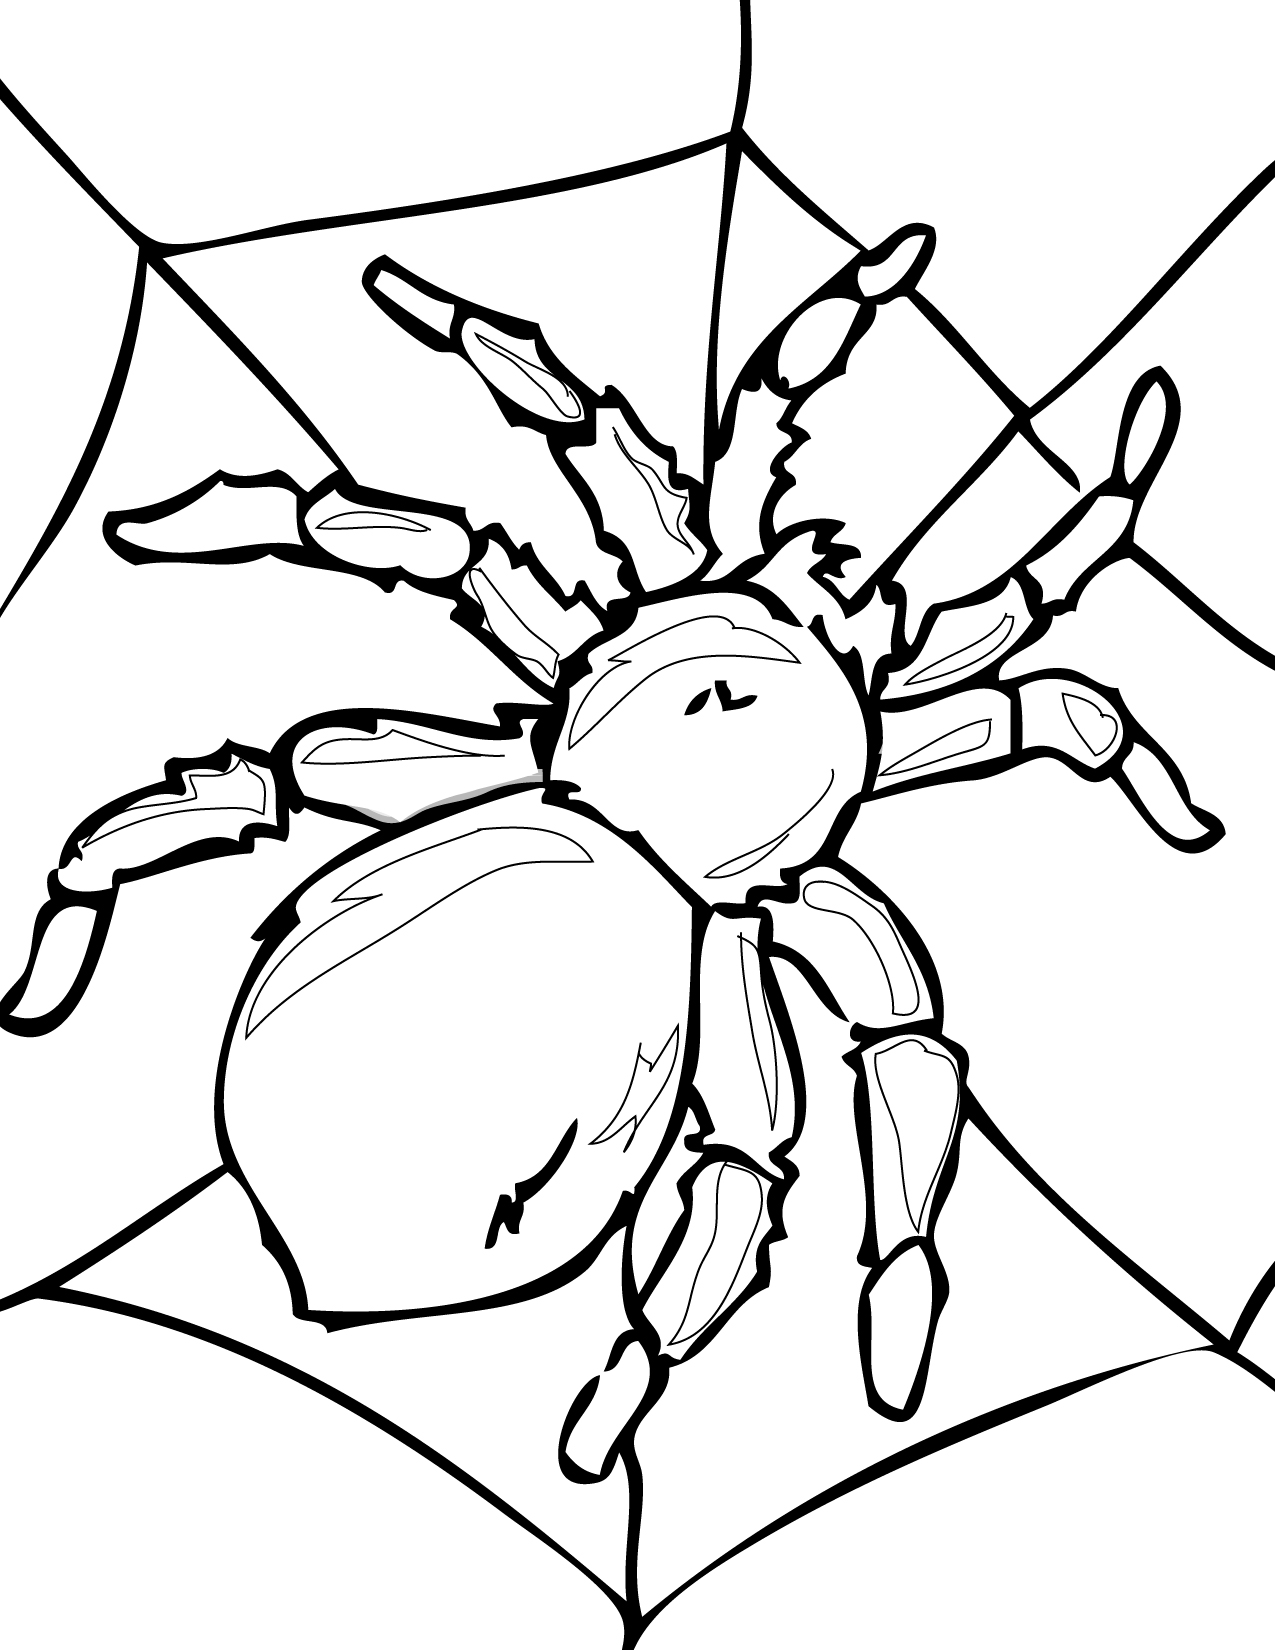 spider-shapes-coloring-pages